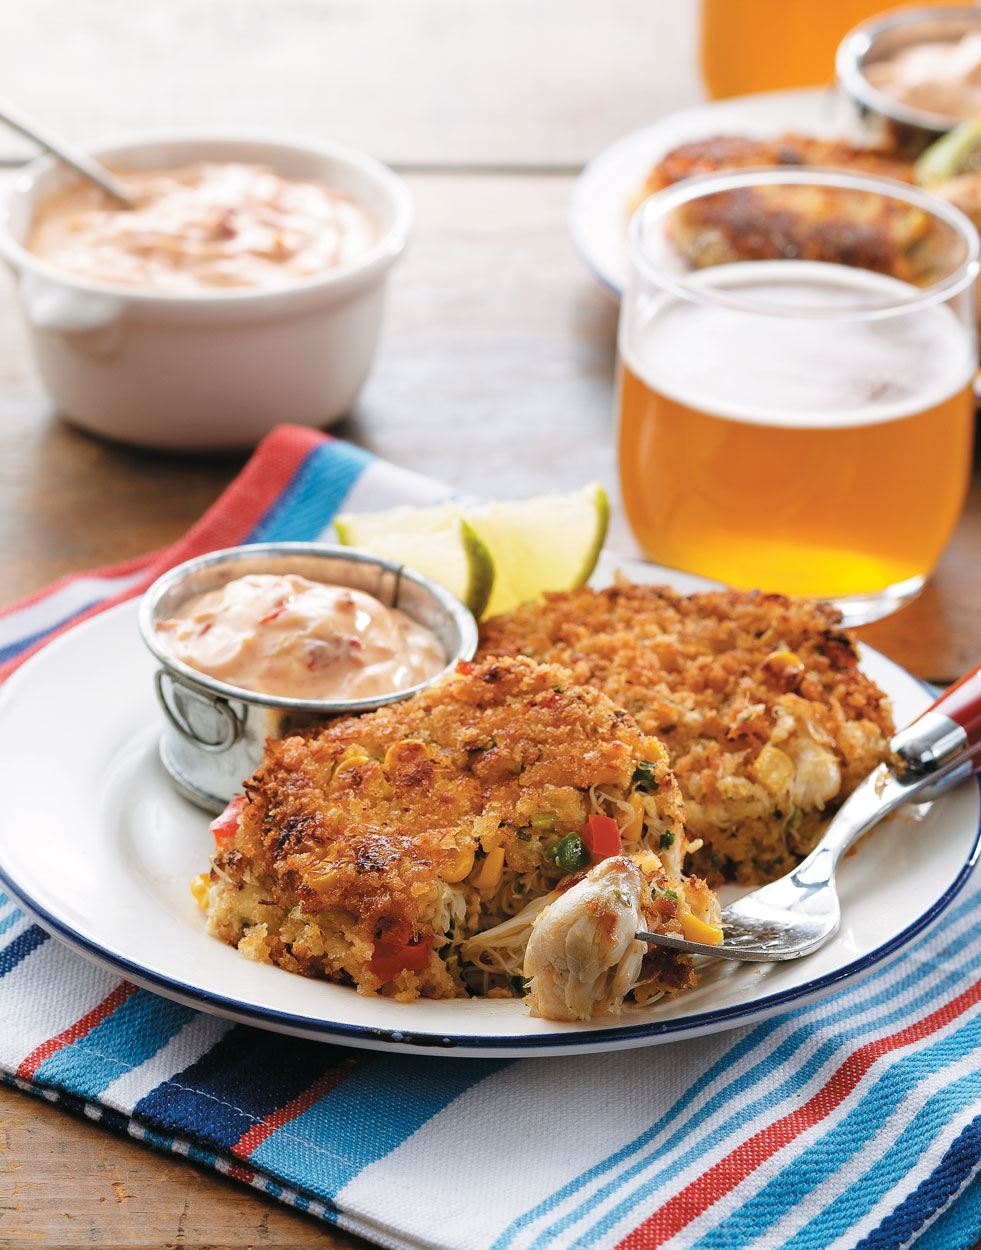 Southwestern Crab Cakes with Chipotle-Lime Aioli Recipe